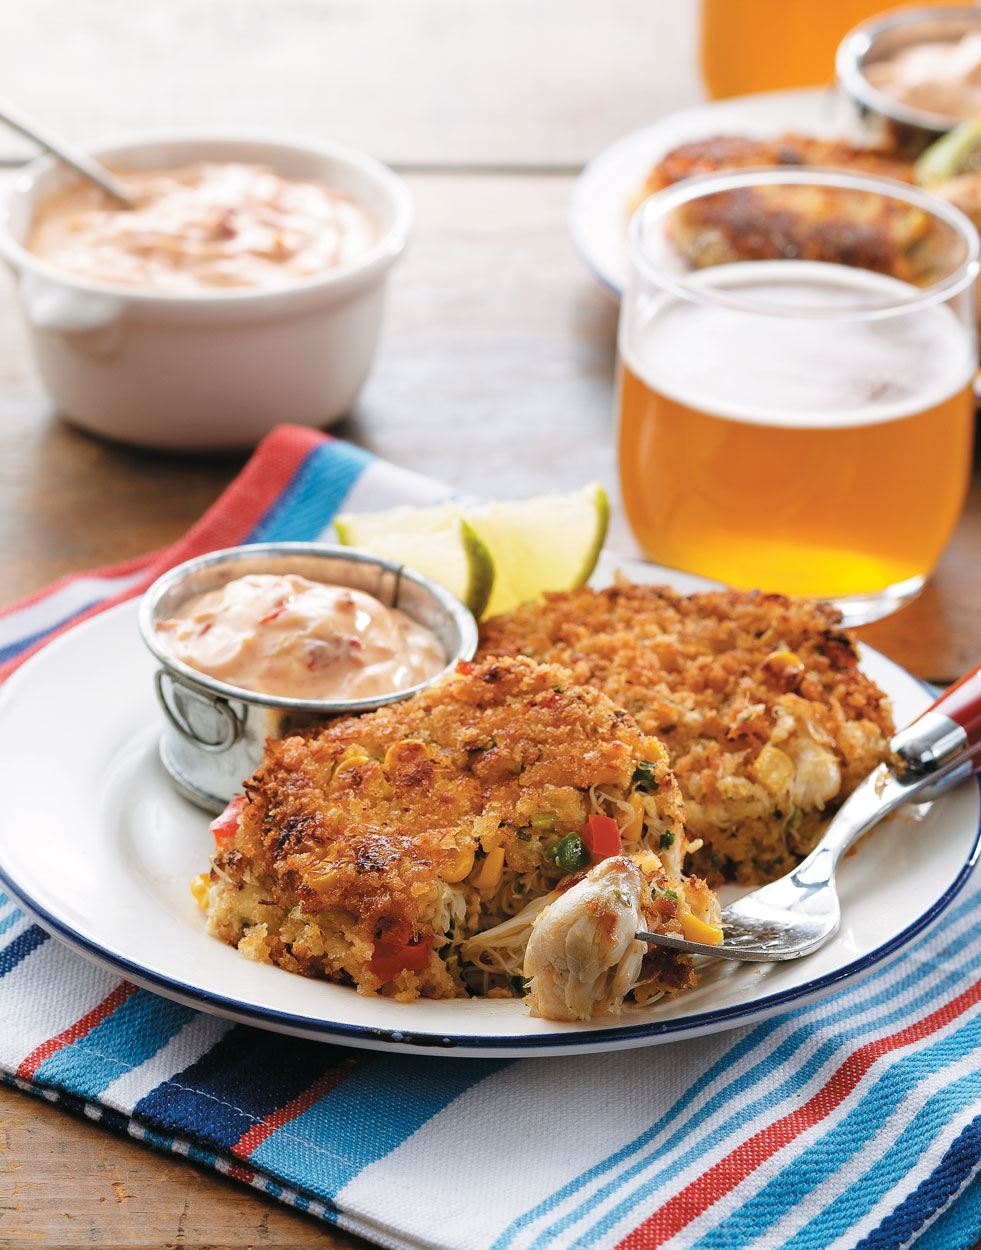 Southwestern Crab Cakes with Chipotle-Lime Aioli Recipe